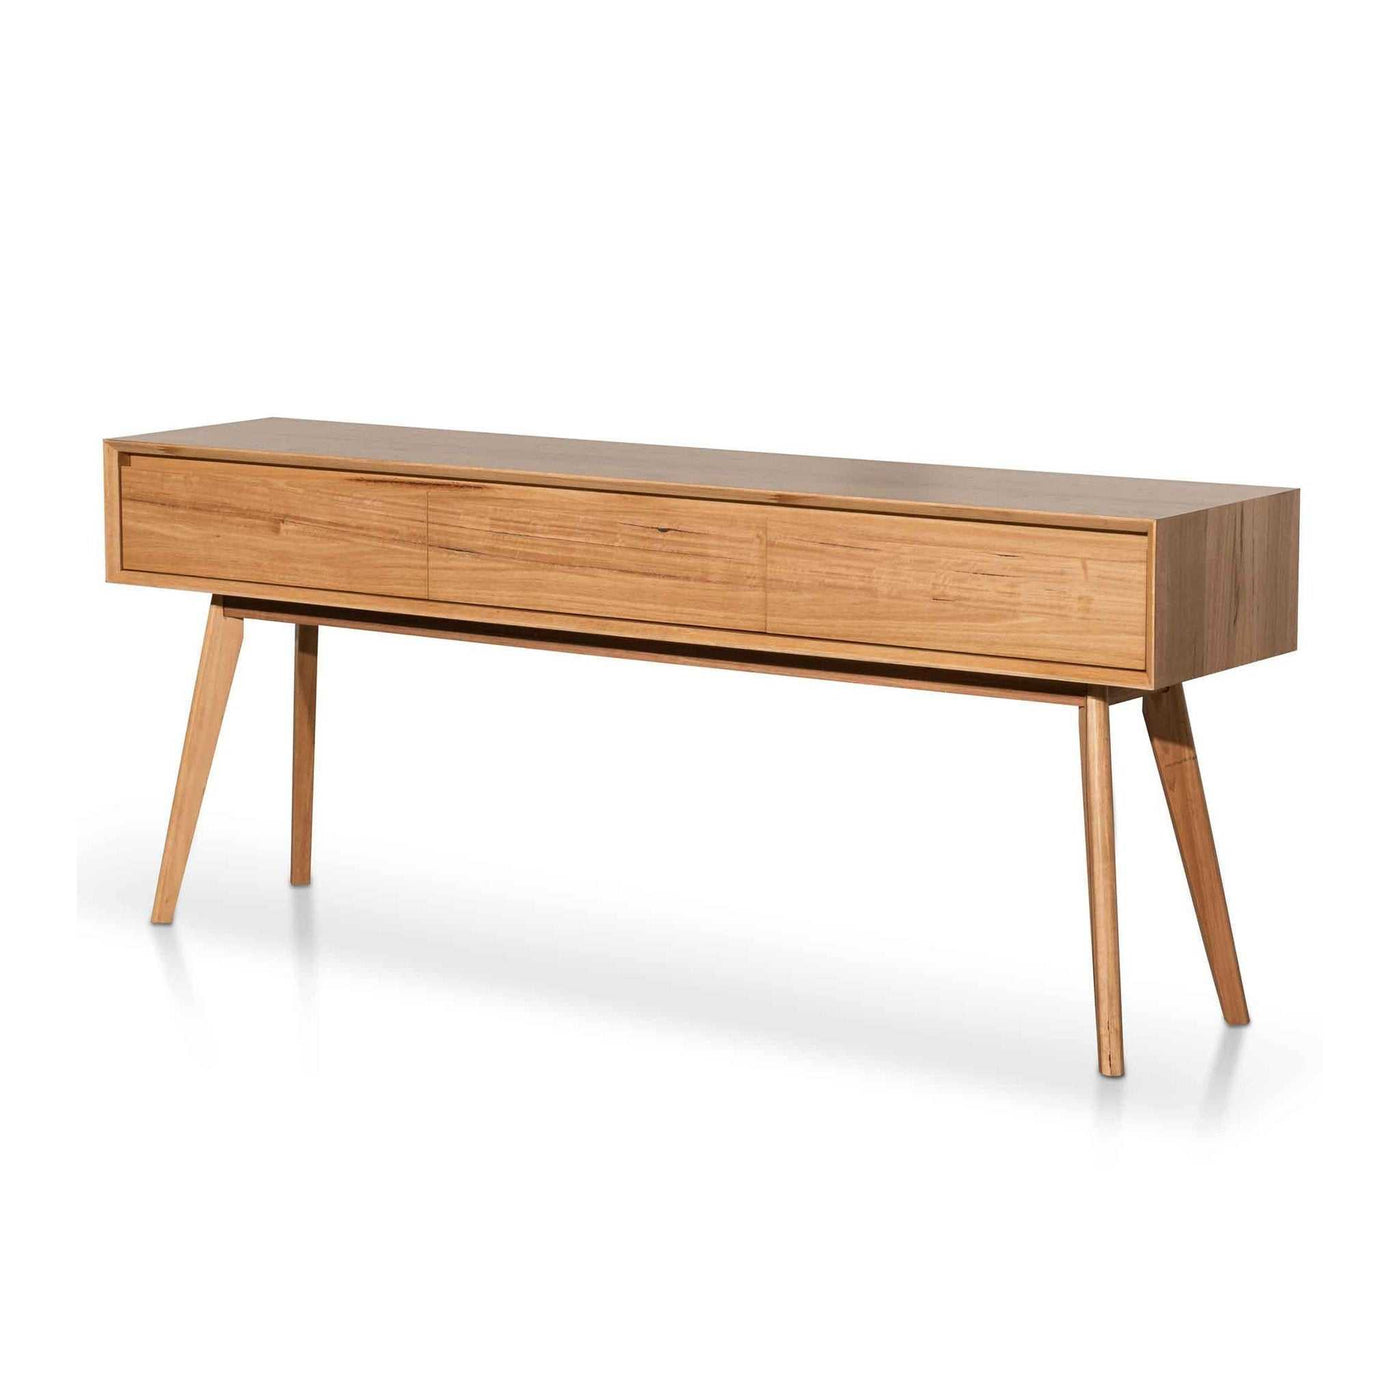 1.8m Console Table - Messmate